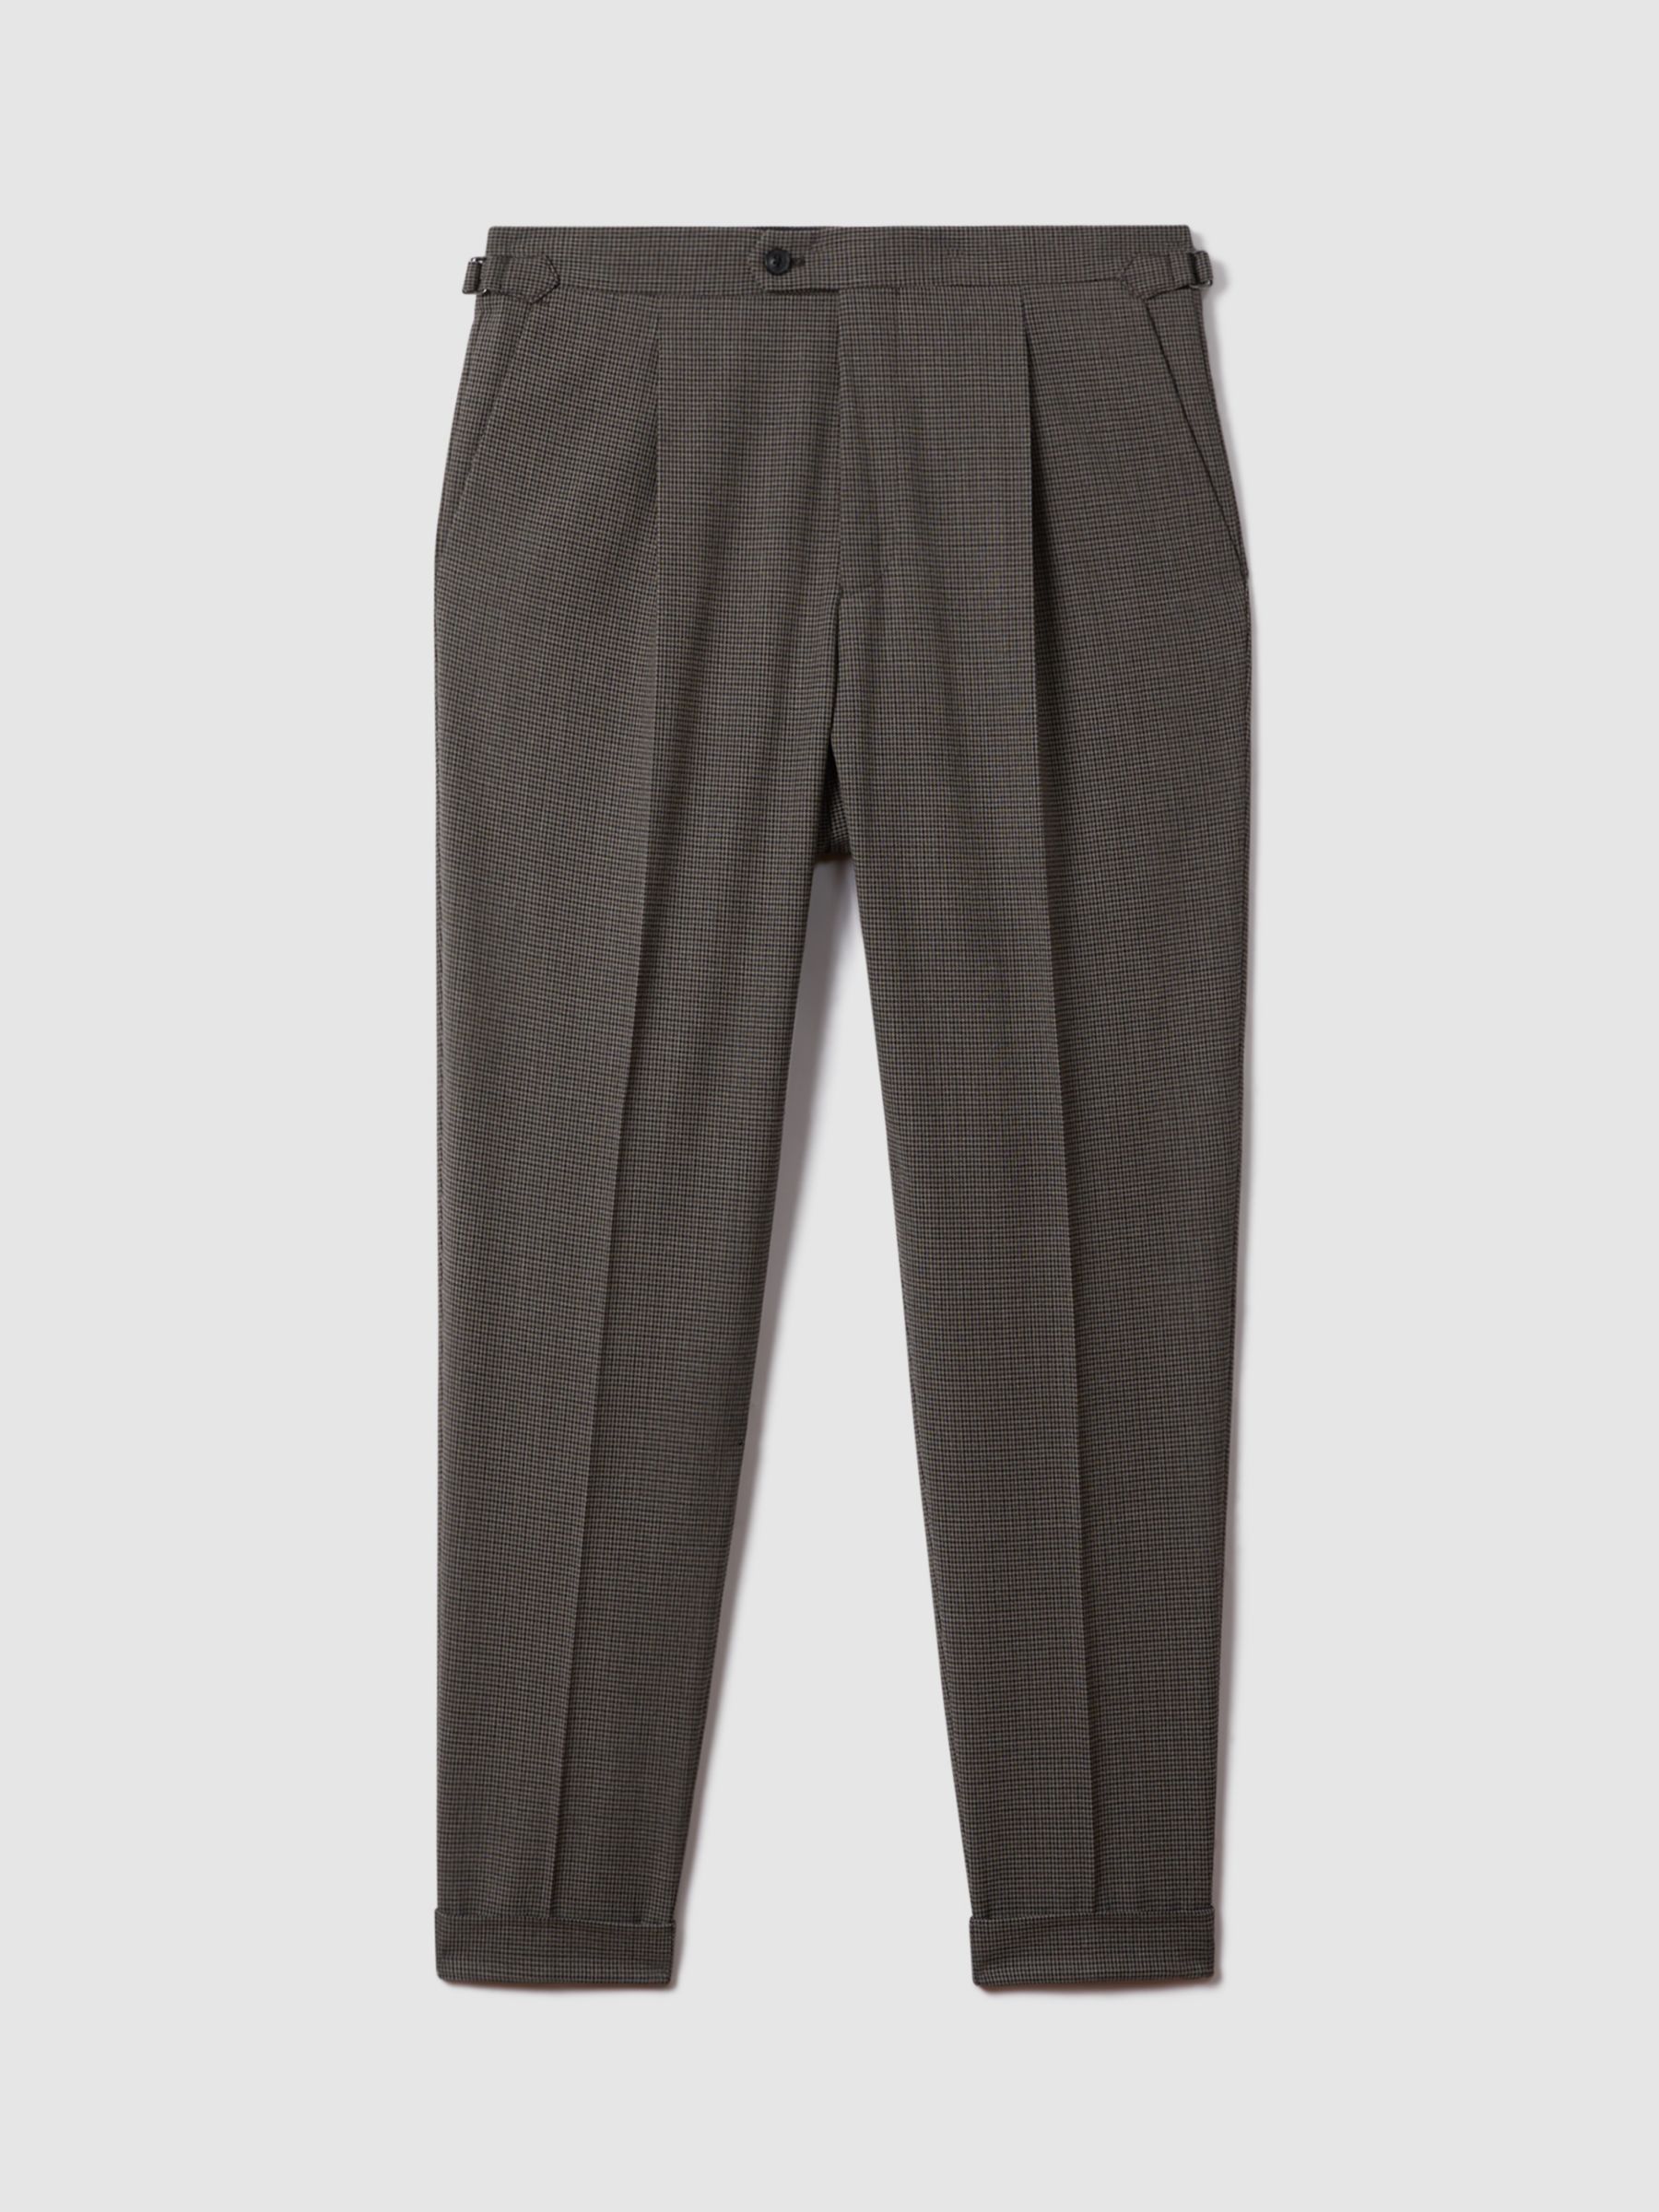 Buy Reiss Rumble Puppytooth Wool Blend Trousers, Brown/Black Online at johnlewis.com